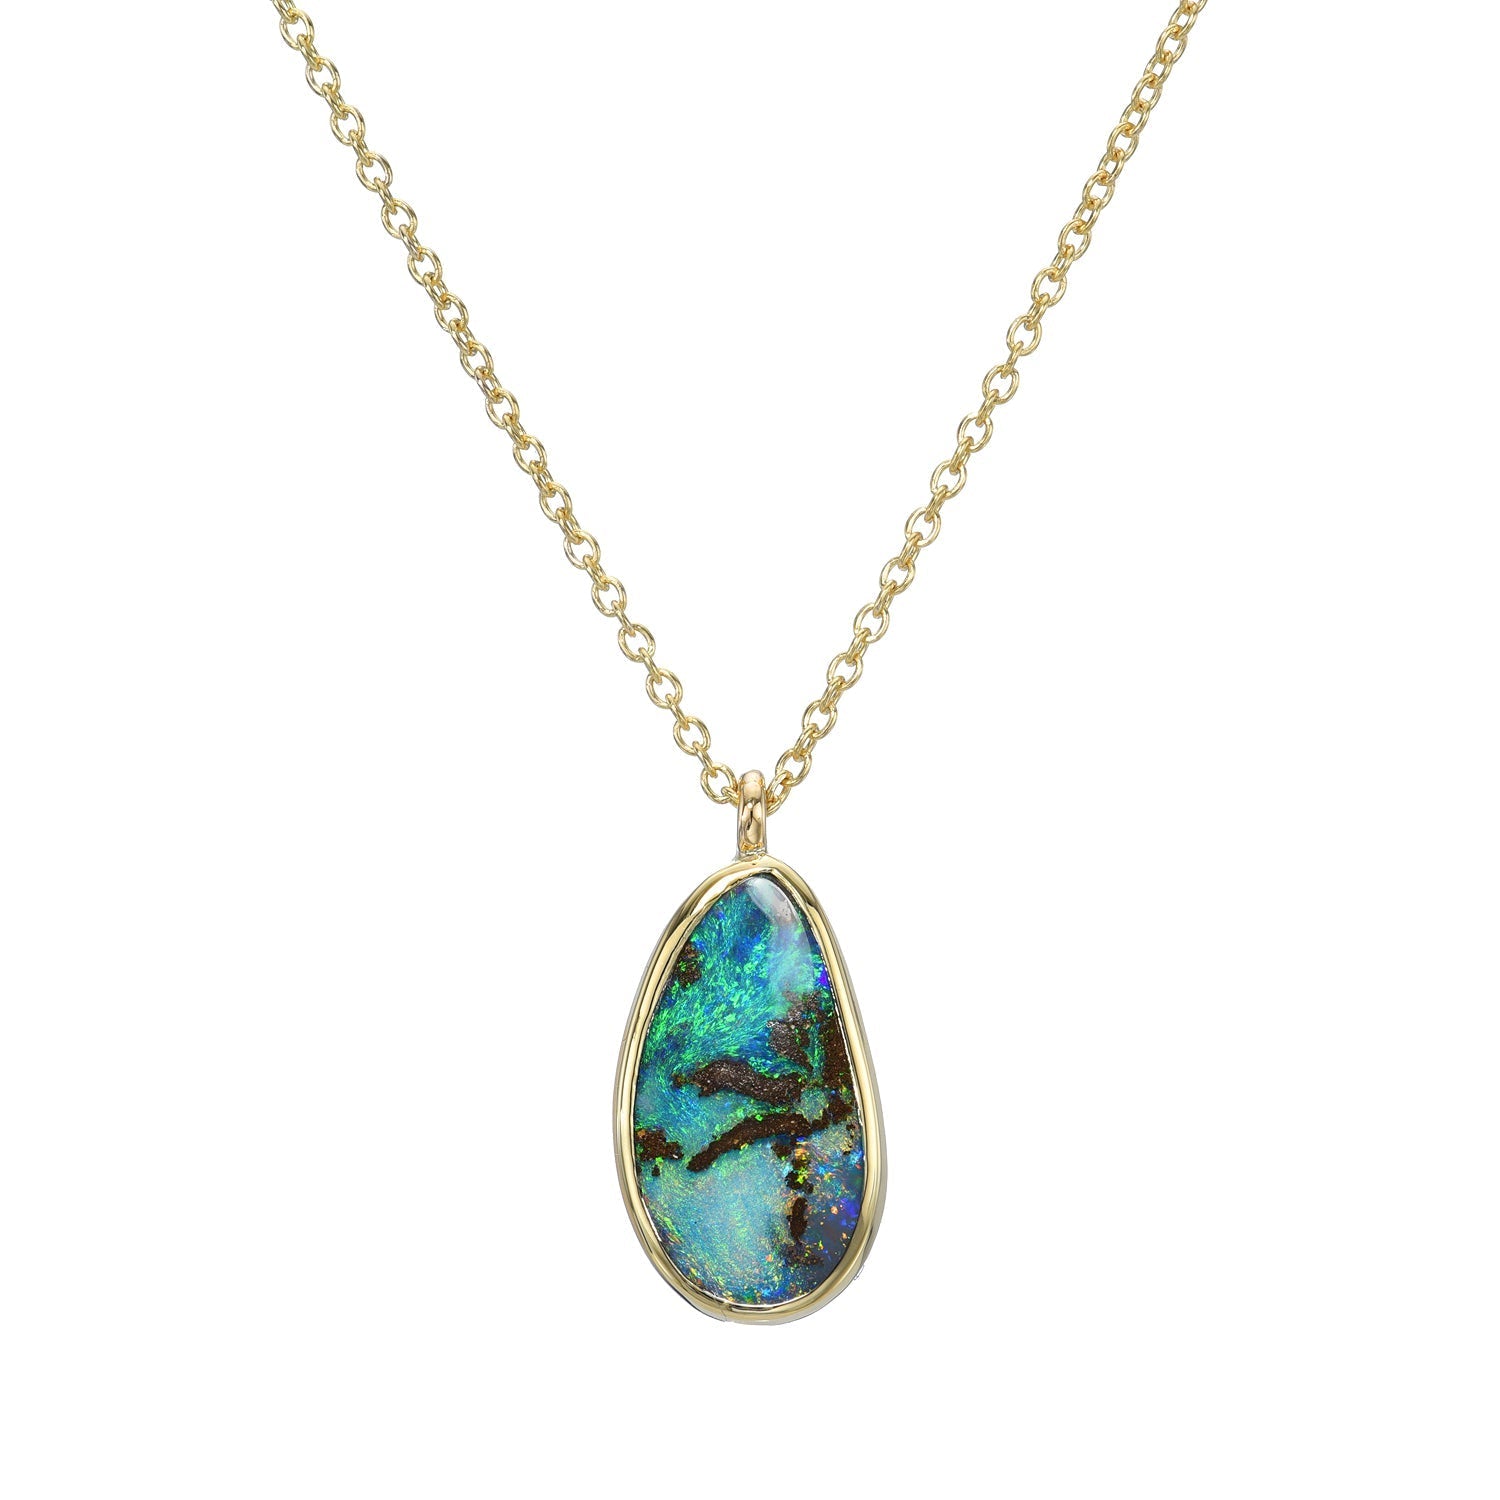 An Australian Opal Necklace by NIXIN Jewelry shown against a white background. The opal pendant is in a bezel setting and is available for purchase on the website with other opal jewelry for sale.